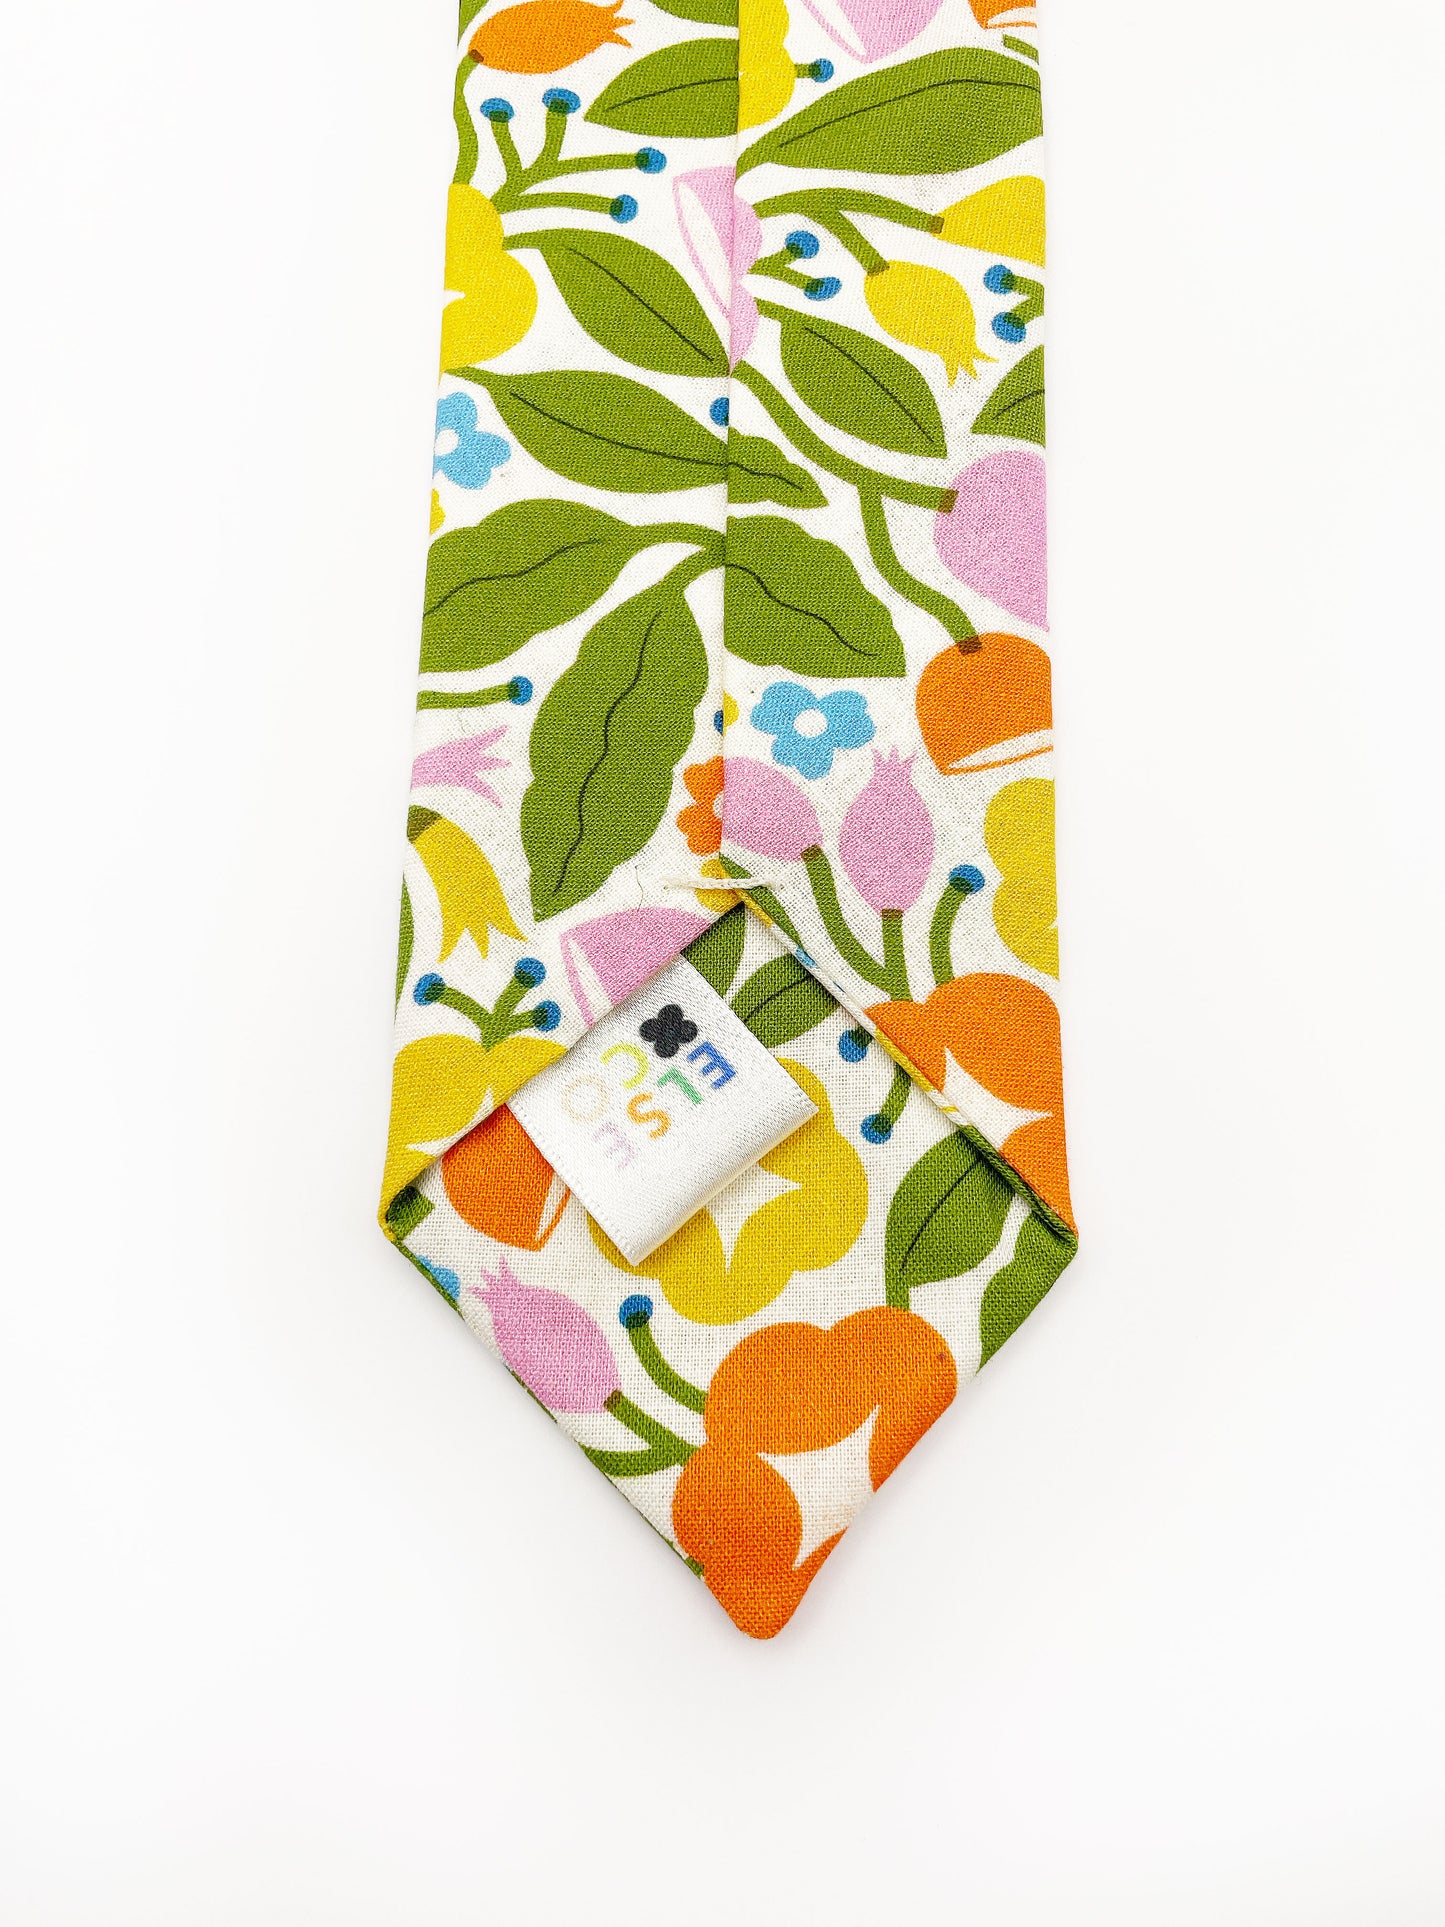 A vibrant necktie with bold yellow, orange, and pink flowers.